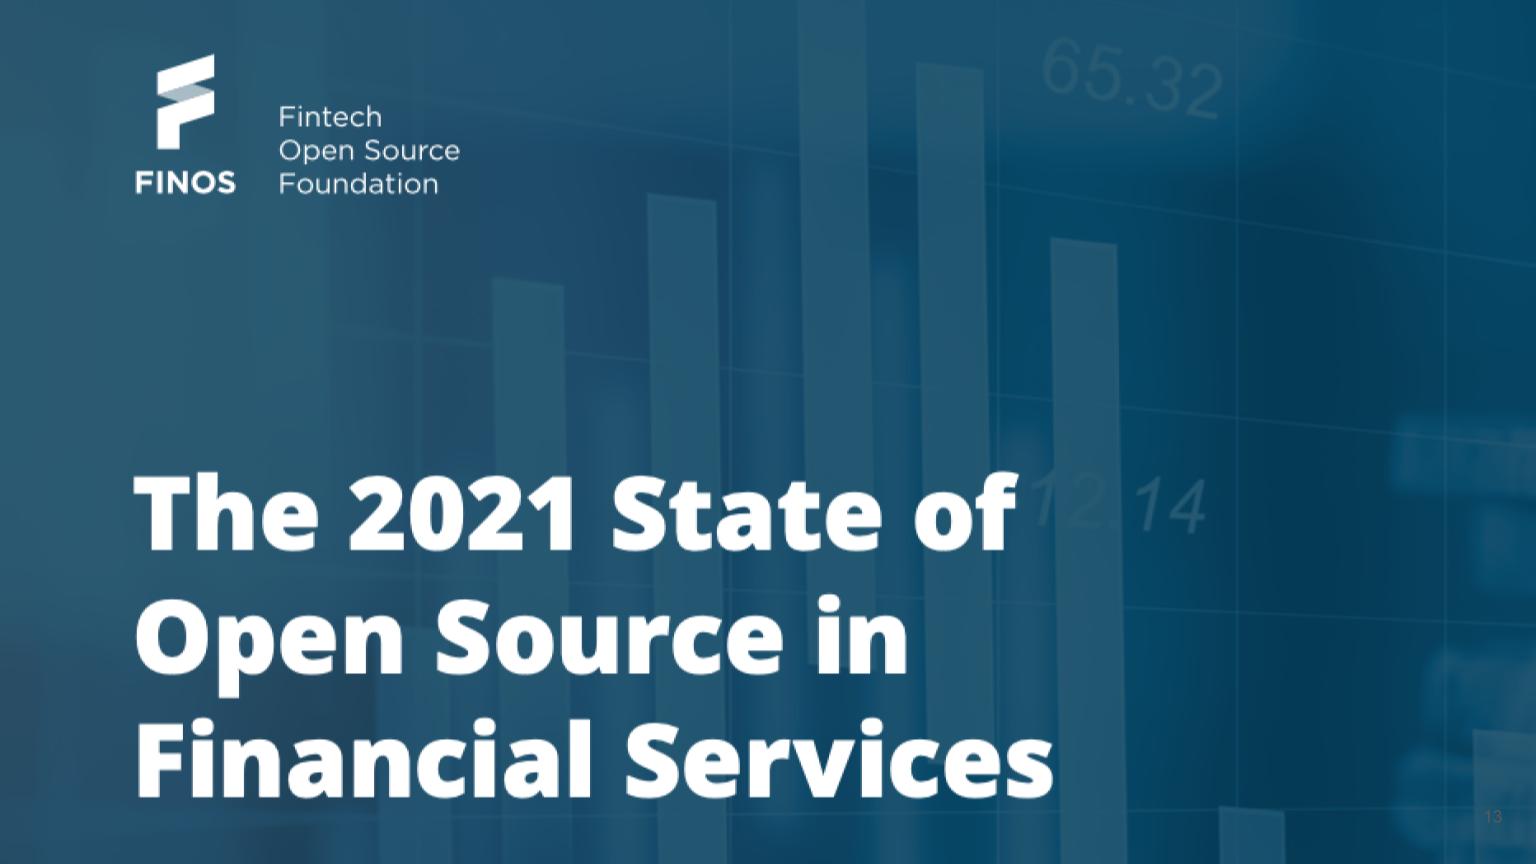 The 2021 State of Open Source in Financial Services